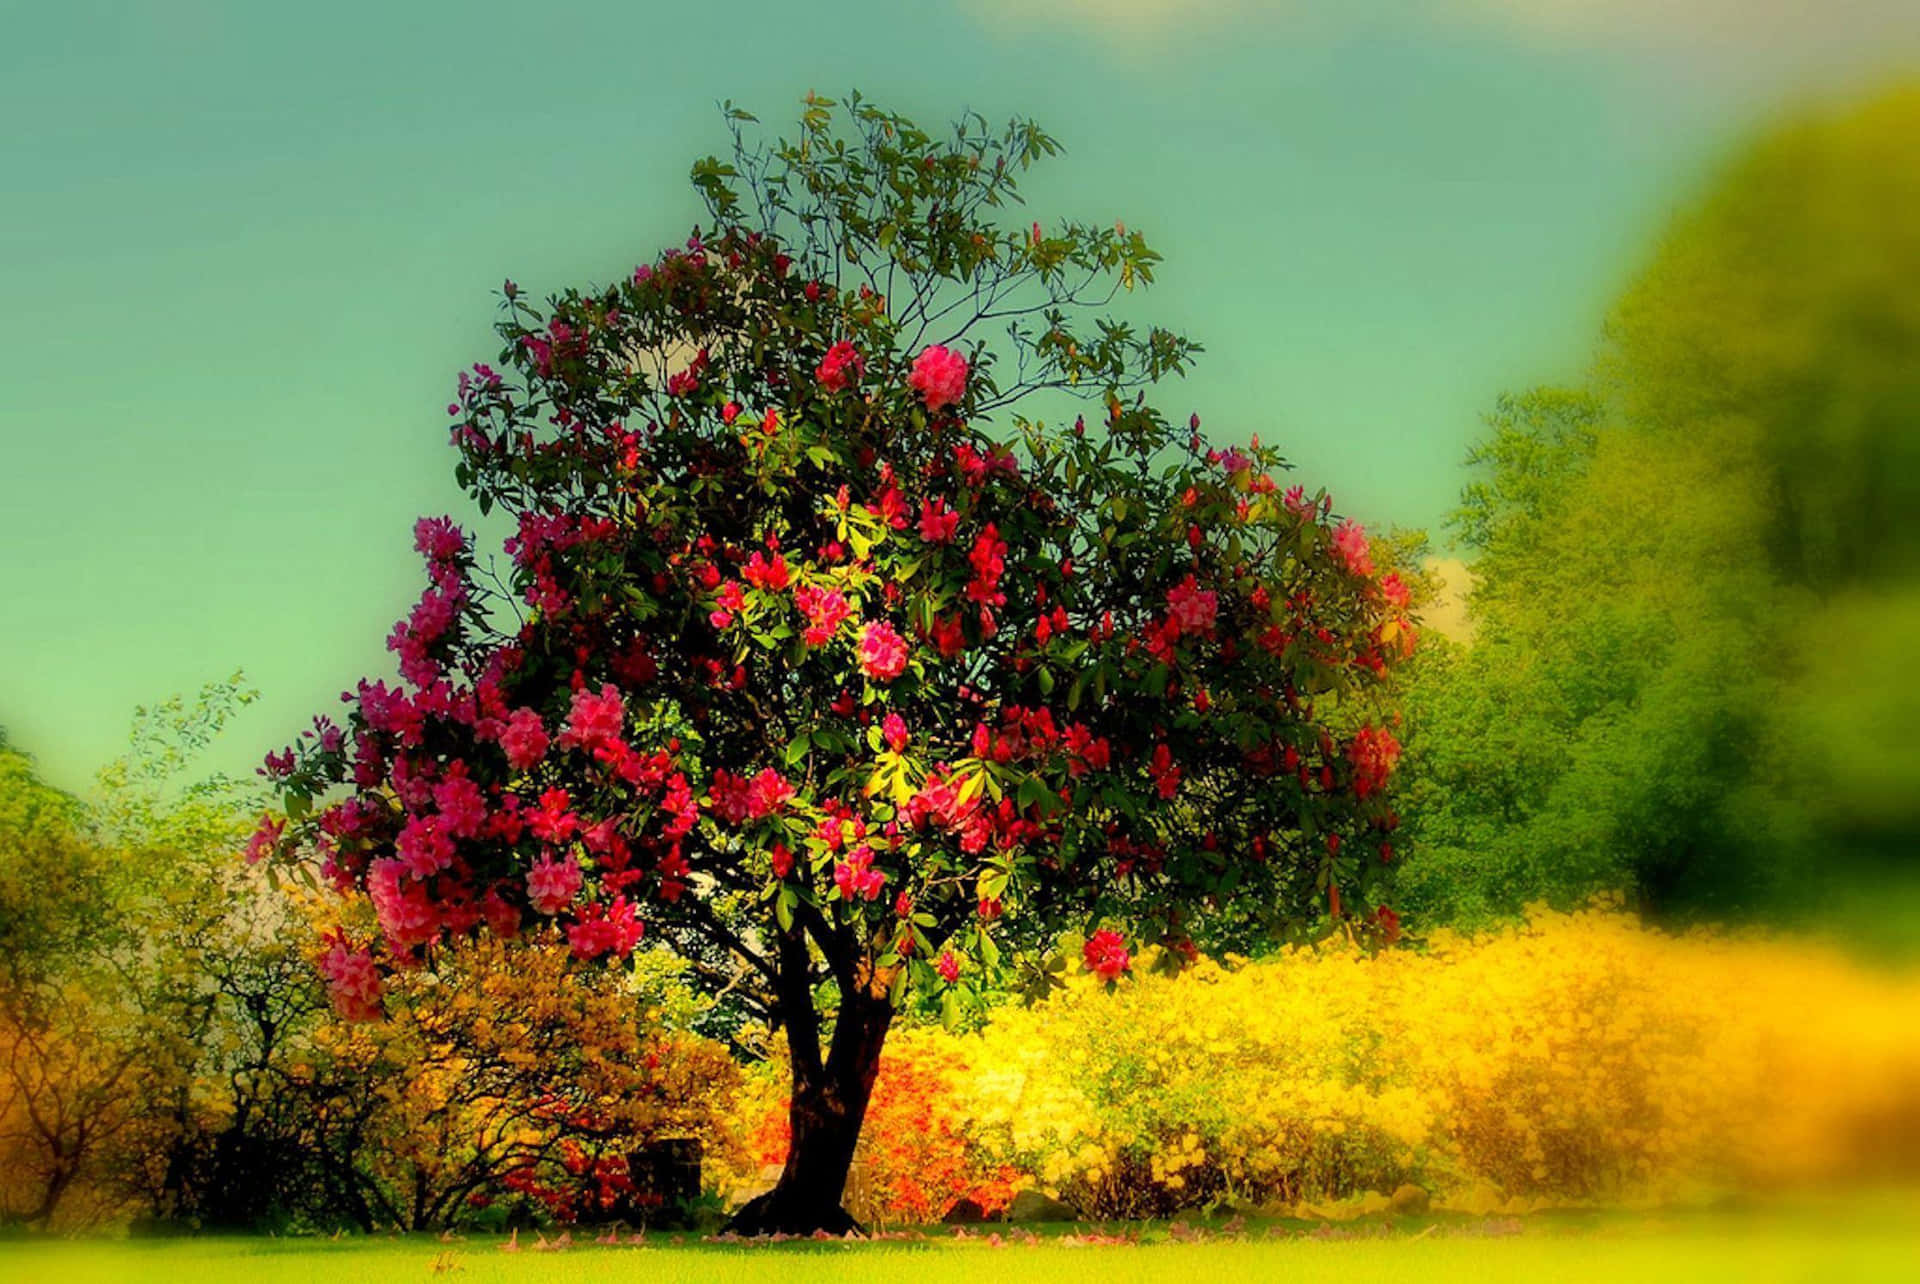 Tree With Red Flowers Vintage Photograph Wallpaper